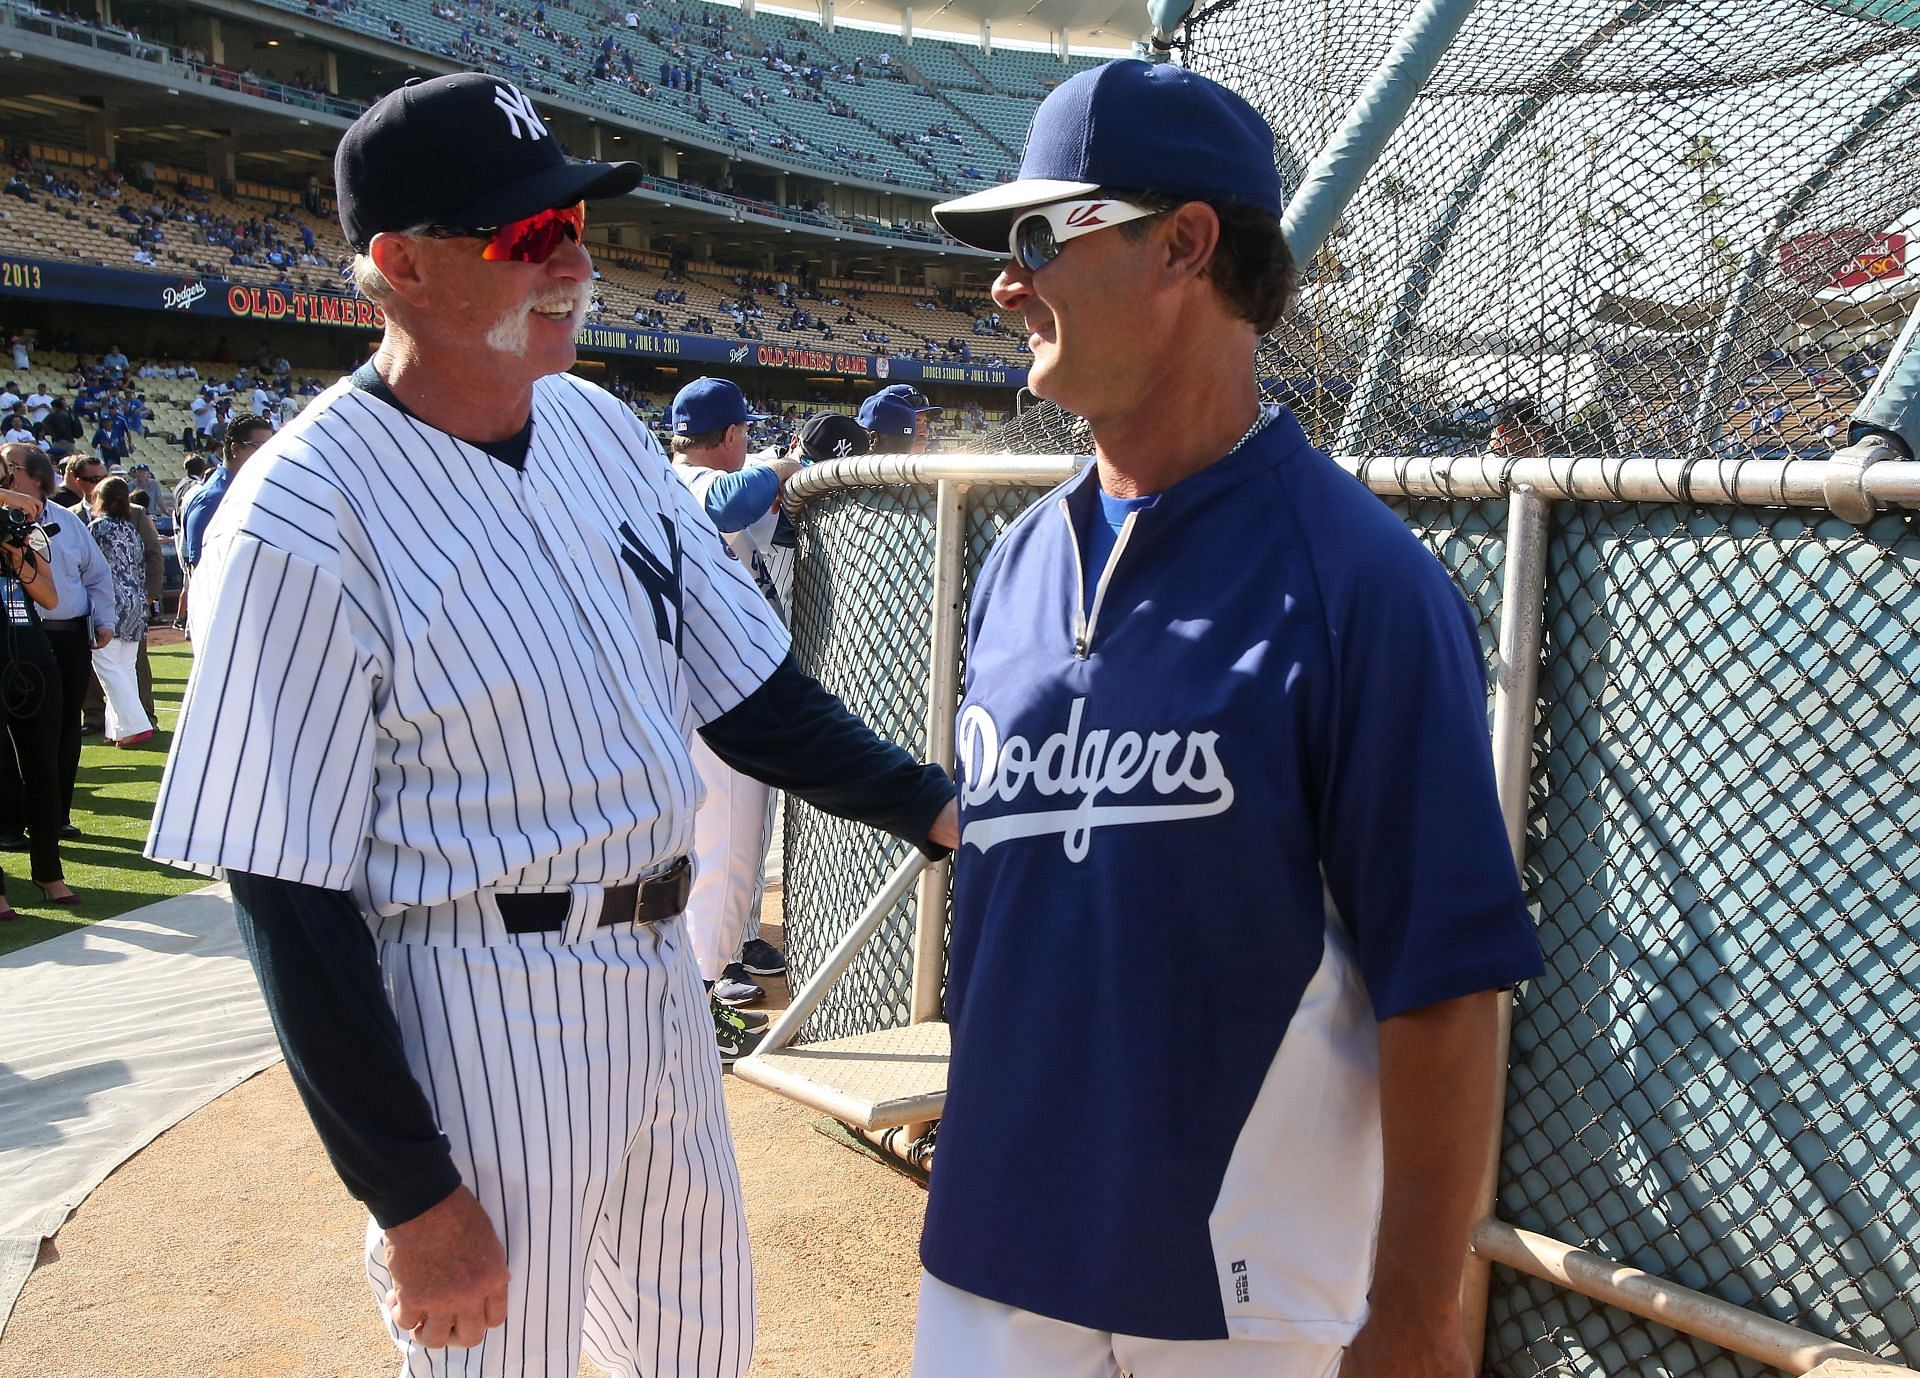 New York Yankees Rich Goose Gossage (L) and Don Mattingly talk before an Old Timers game at Dodger Stadium